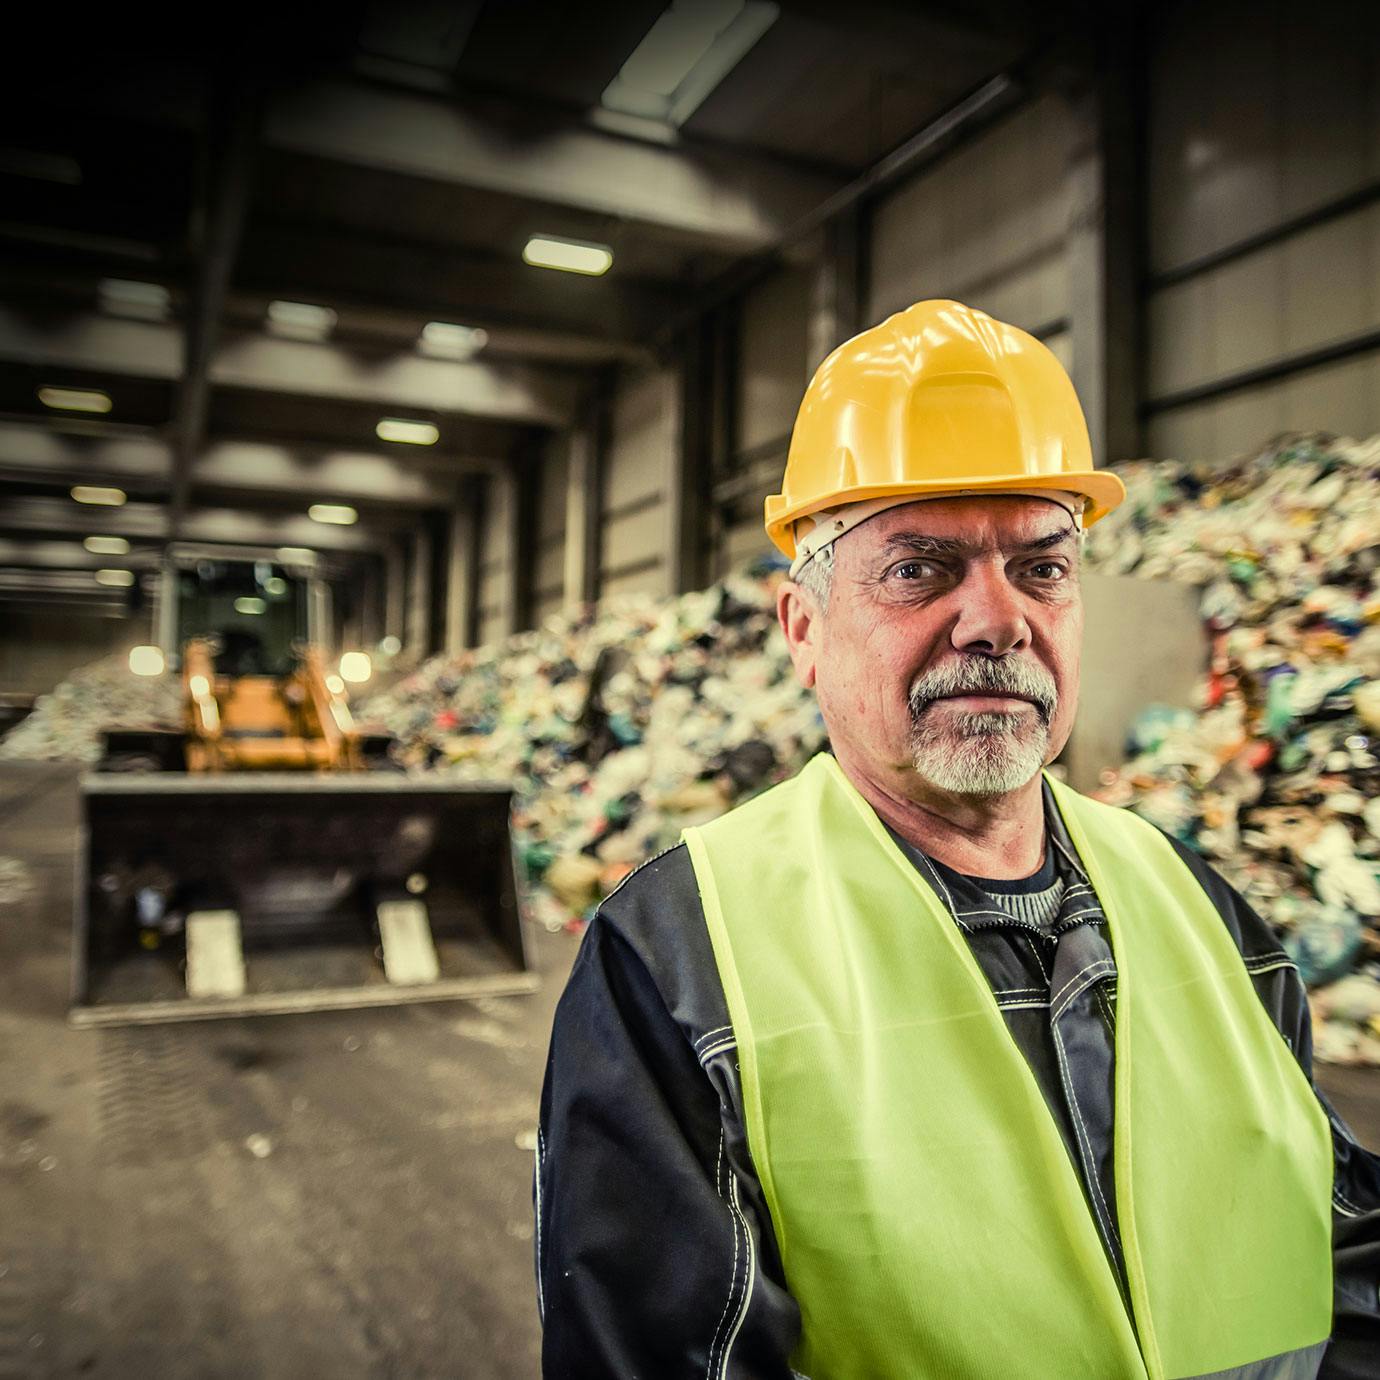 Man standing in front of waste disposal area and bulldozer